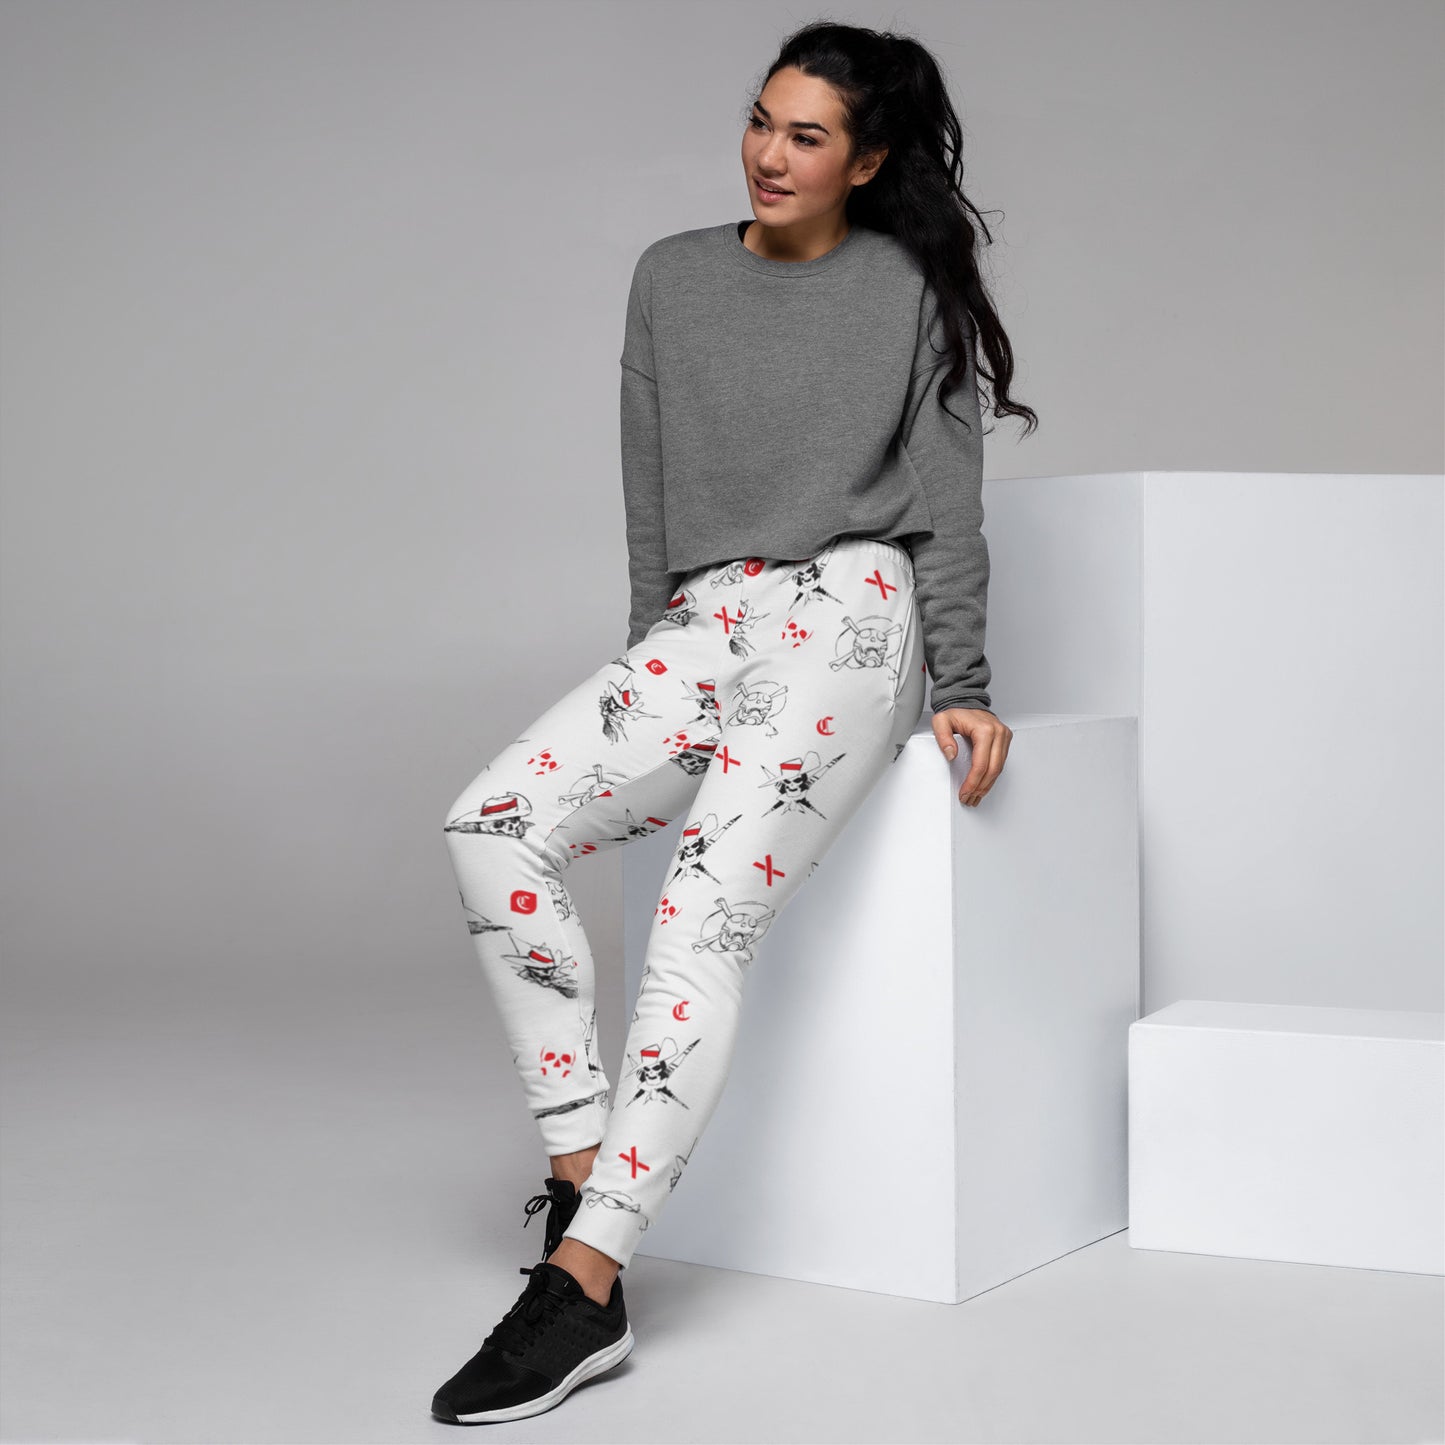 The gaudy joggers - women's